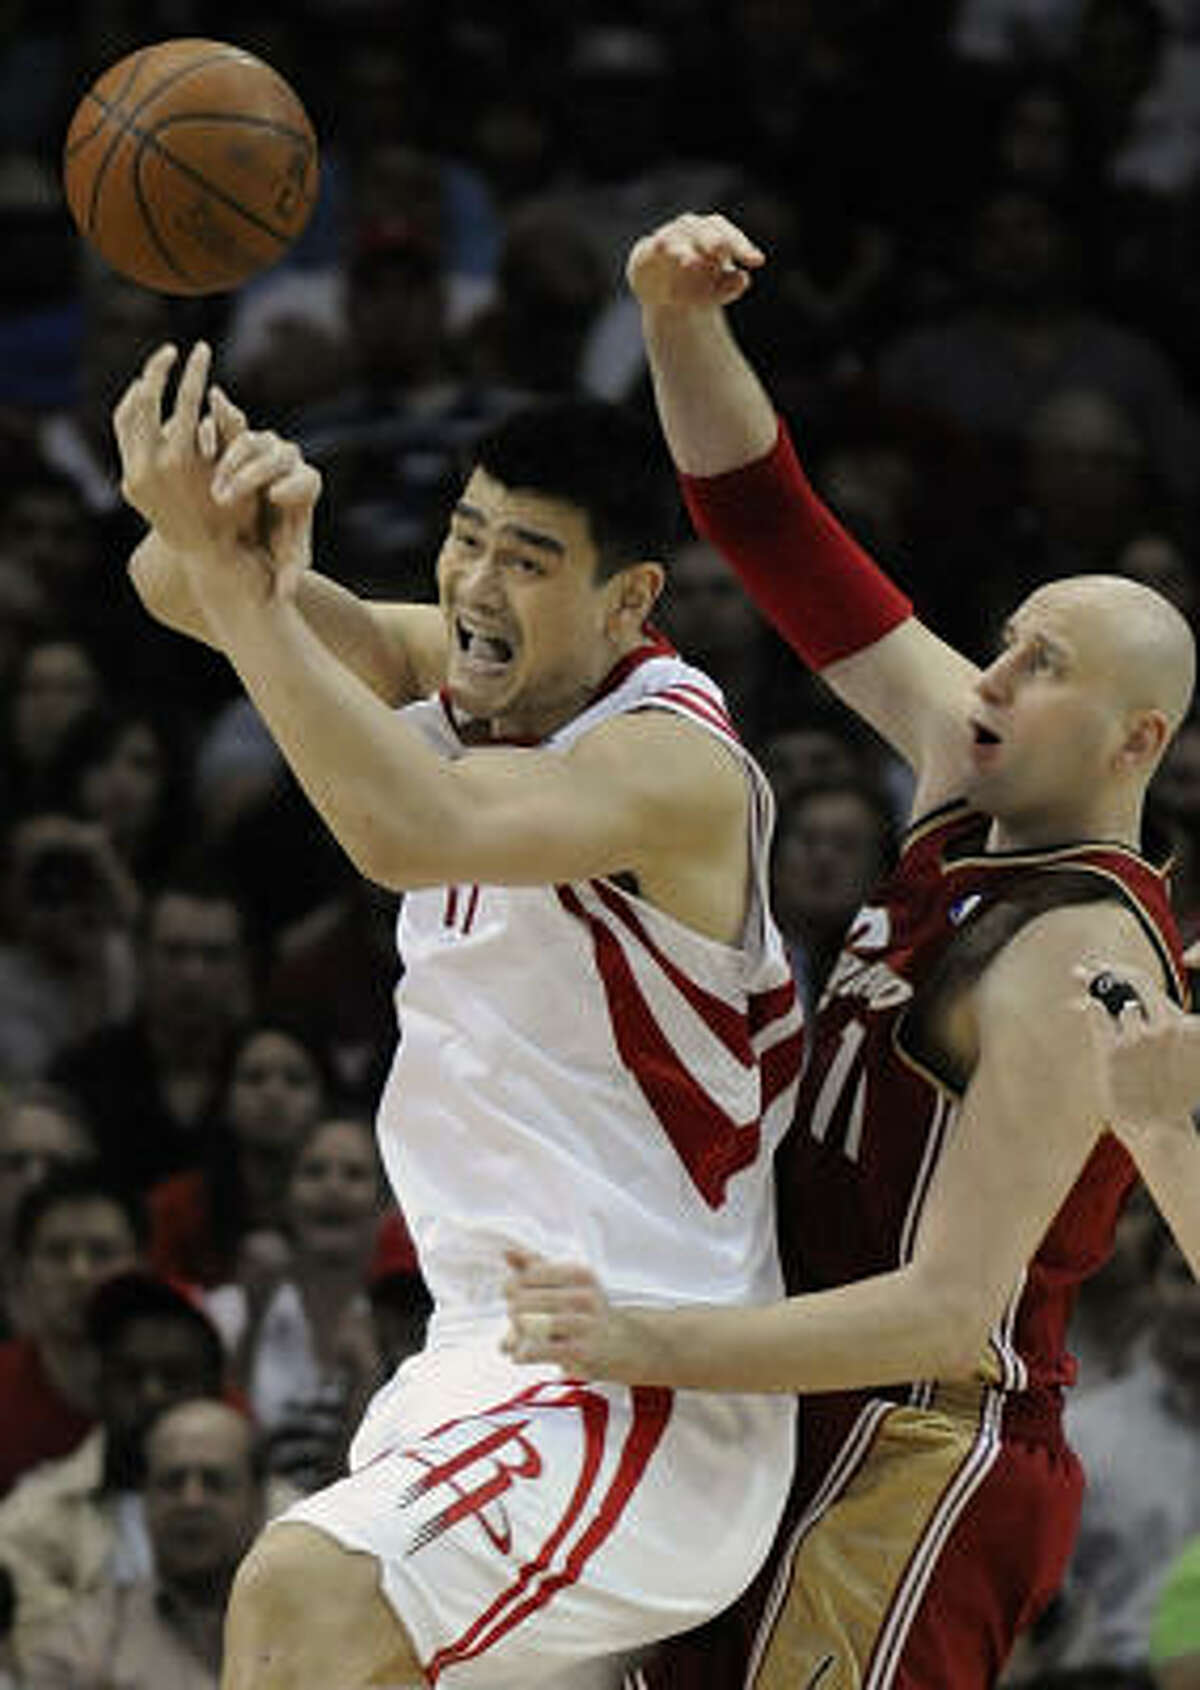 Like Zydrunas Ilgauskas, Yao Ming had an operation of his left foot, changing the arch to alleviate the stress on the bone that had fractured.